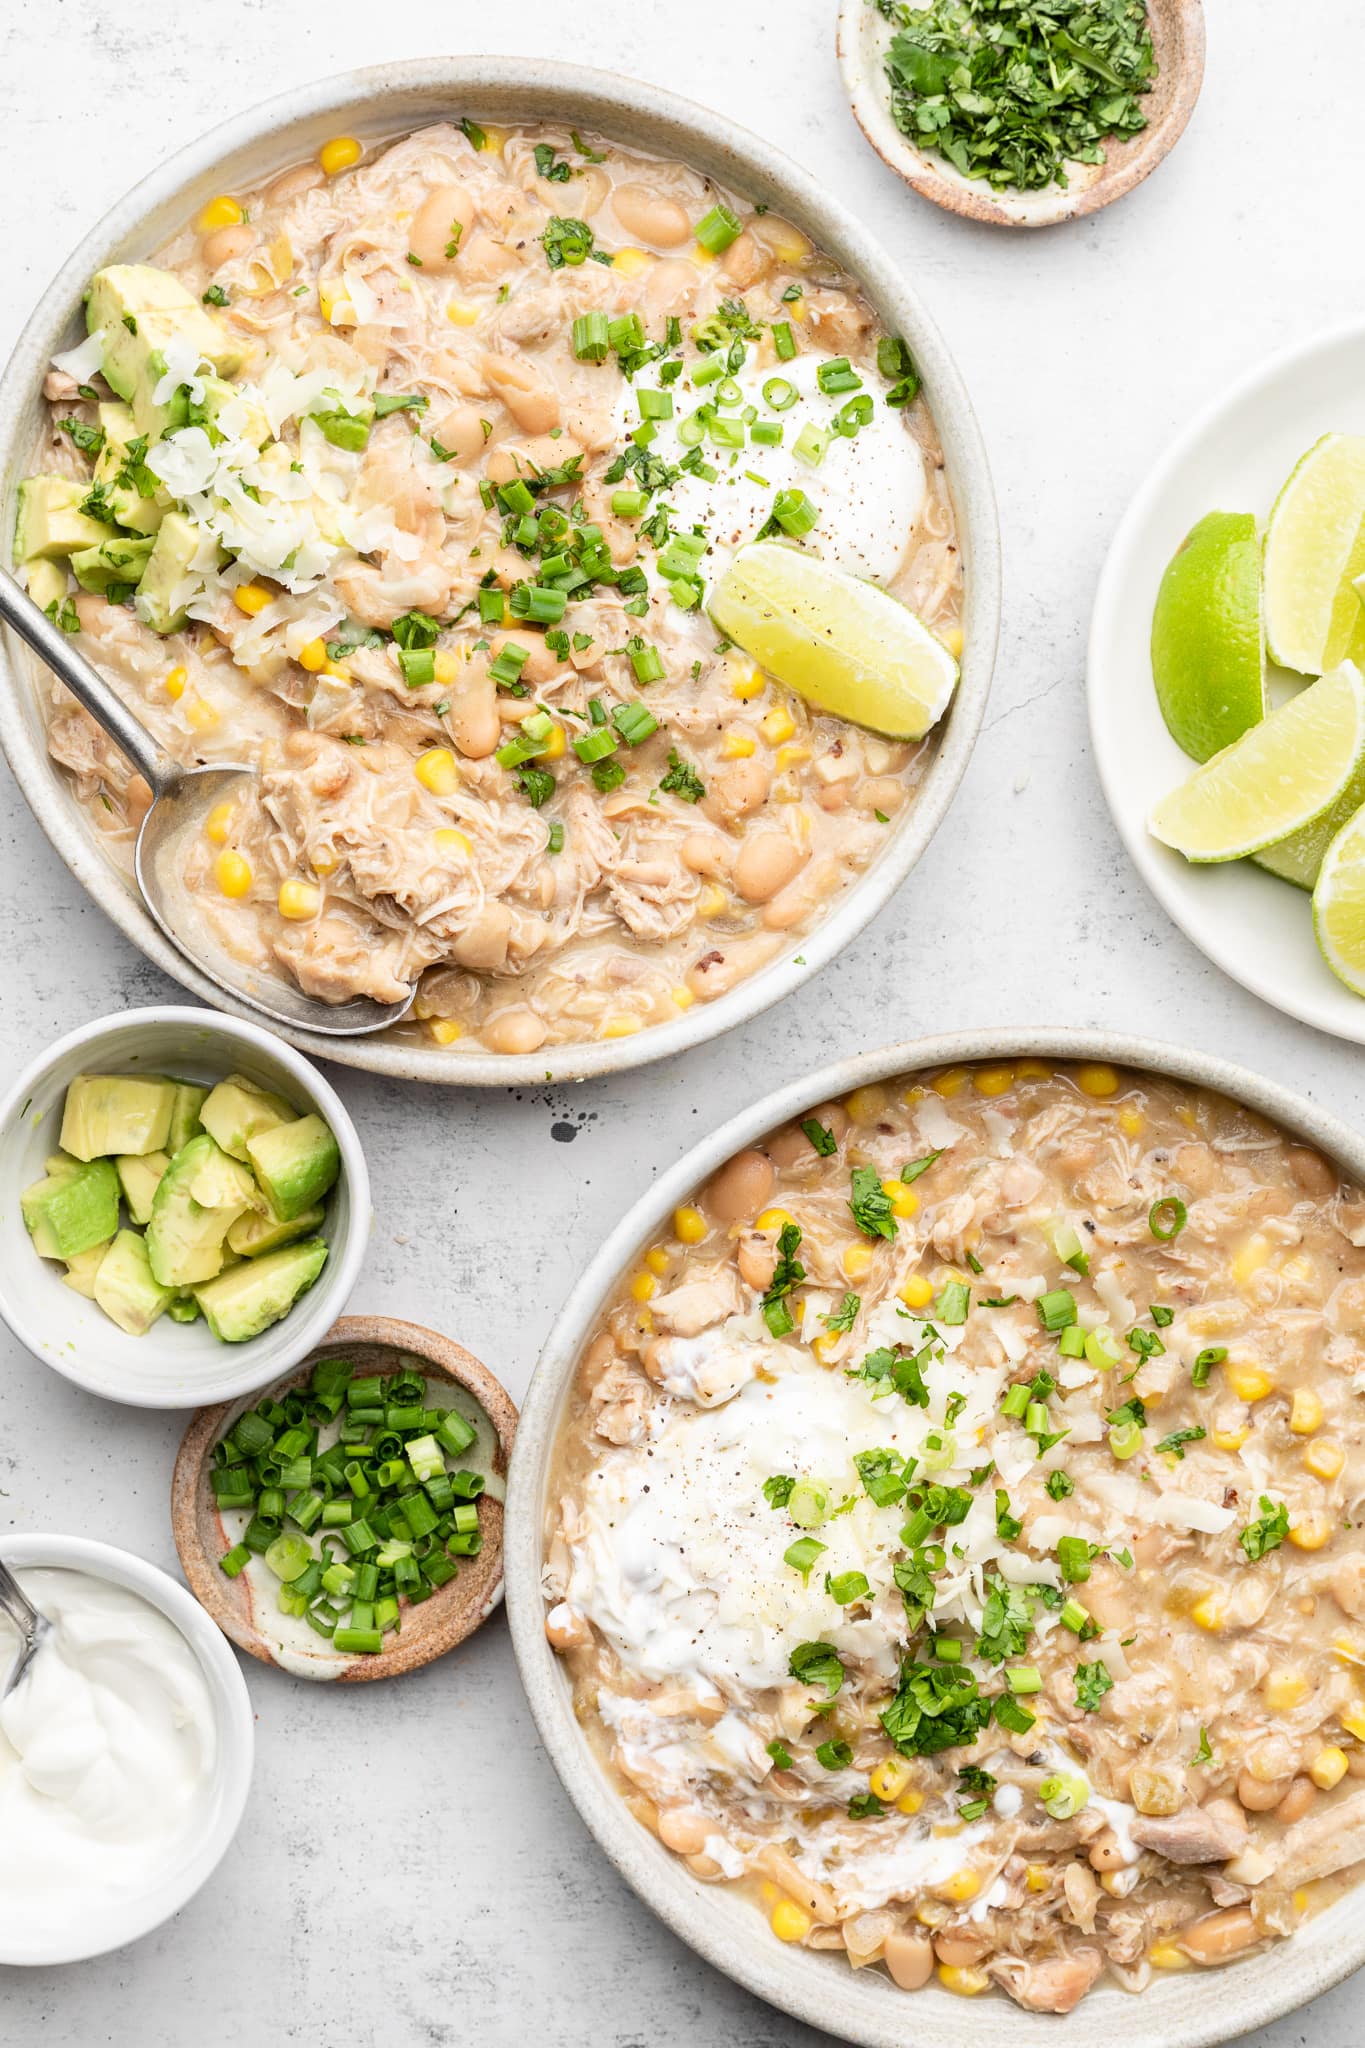 https://allthehealthythings.com/wp-content/uploads/2021/01/healthy-white-chicken-chili-5.jpg